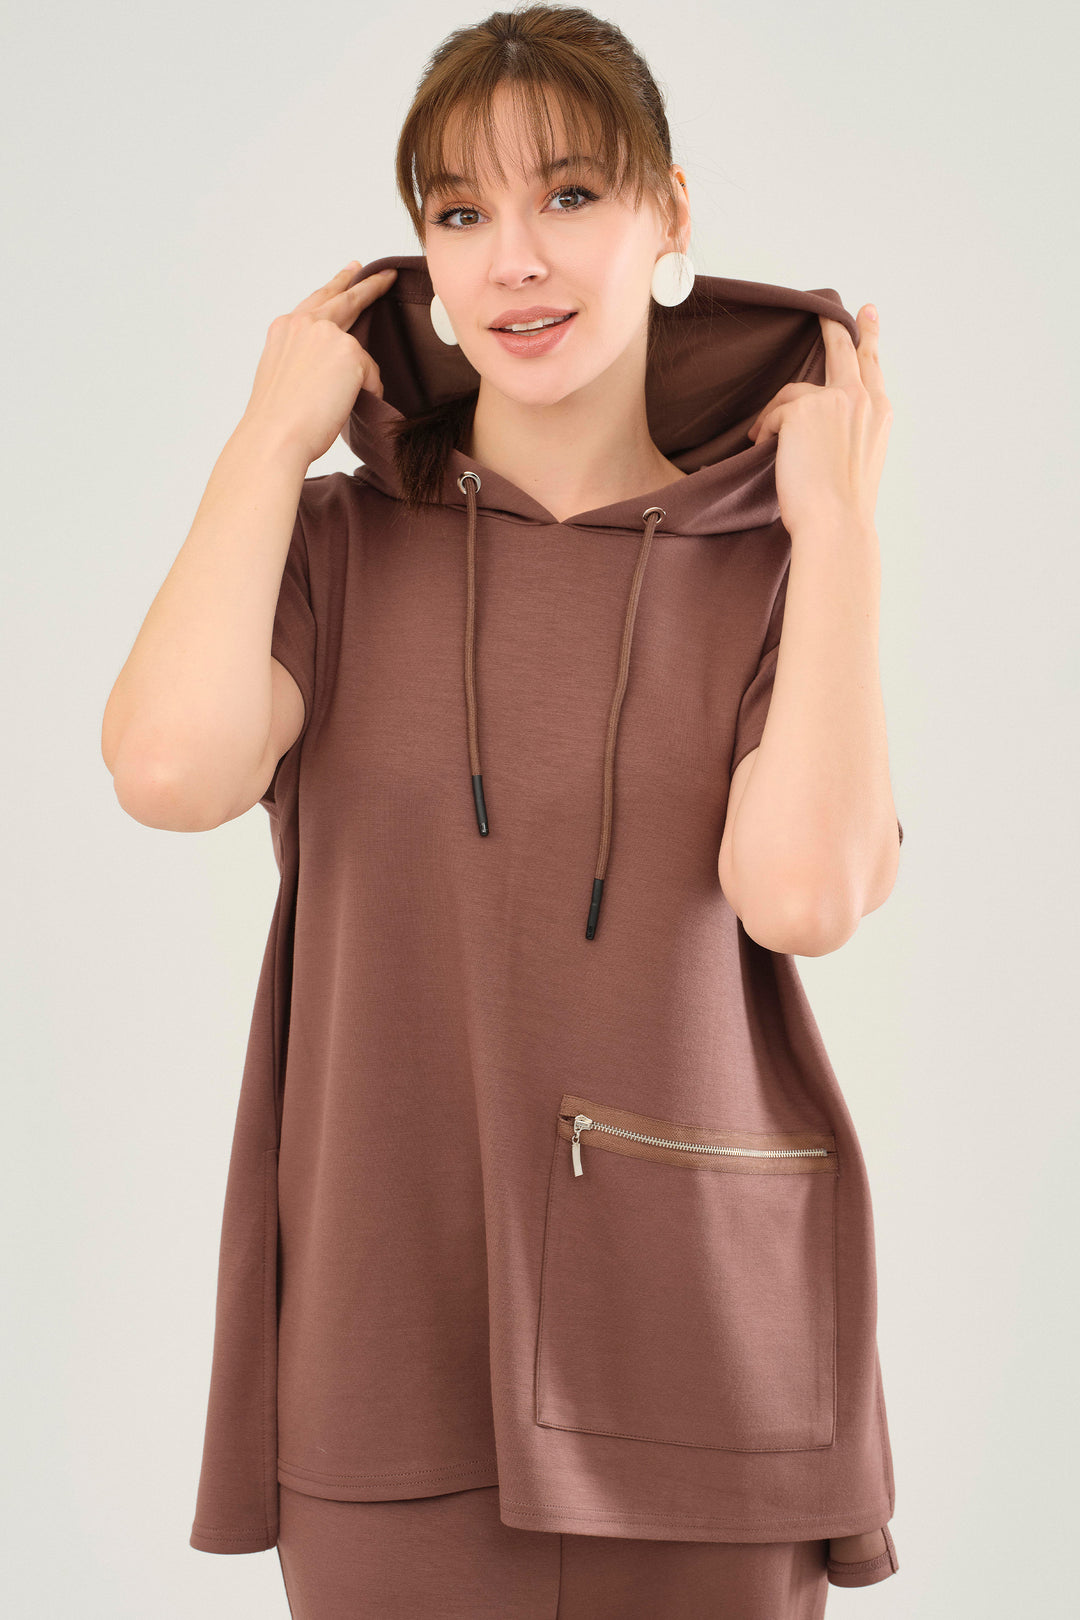 It is beautifully constructed with a luxe sweet chocolate hue (the brown version) and a hooded neckline. A large side pocket adds an extra touch of practicality, while the lower back hem provides a figure-flattering looser fit. 